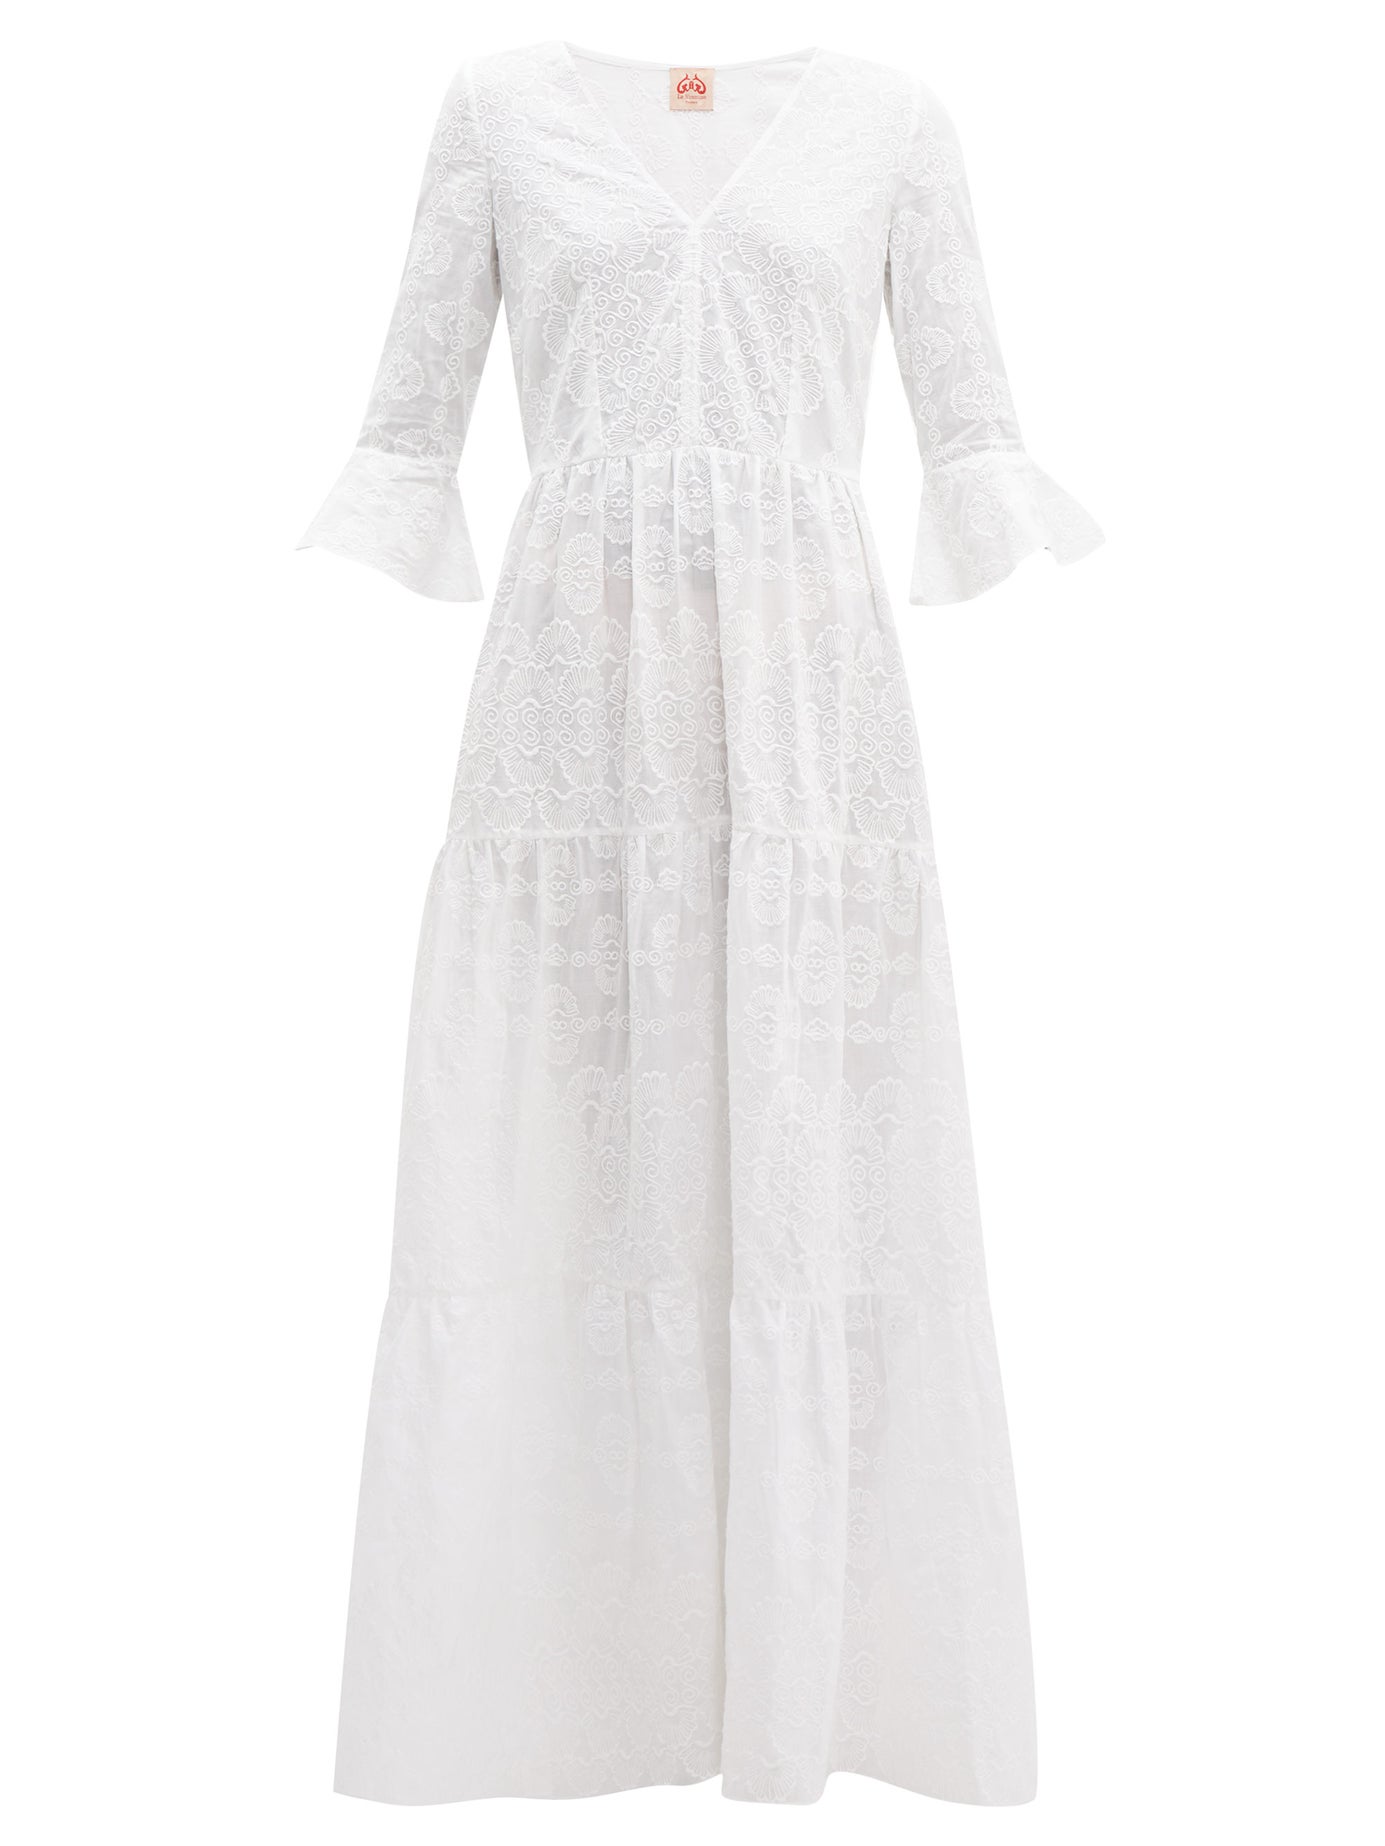 Dress Like You’re in a Swedish Cult With These Midsommar-inpired Pieces ...